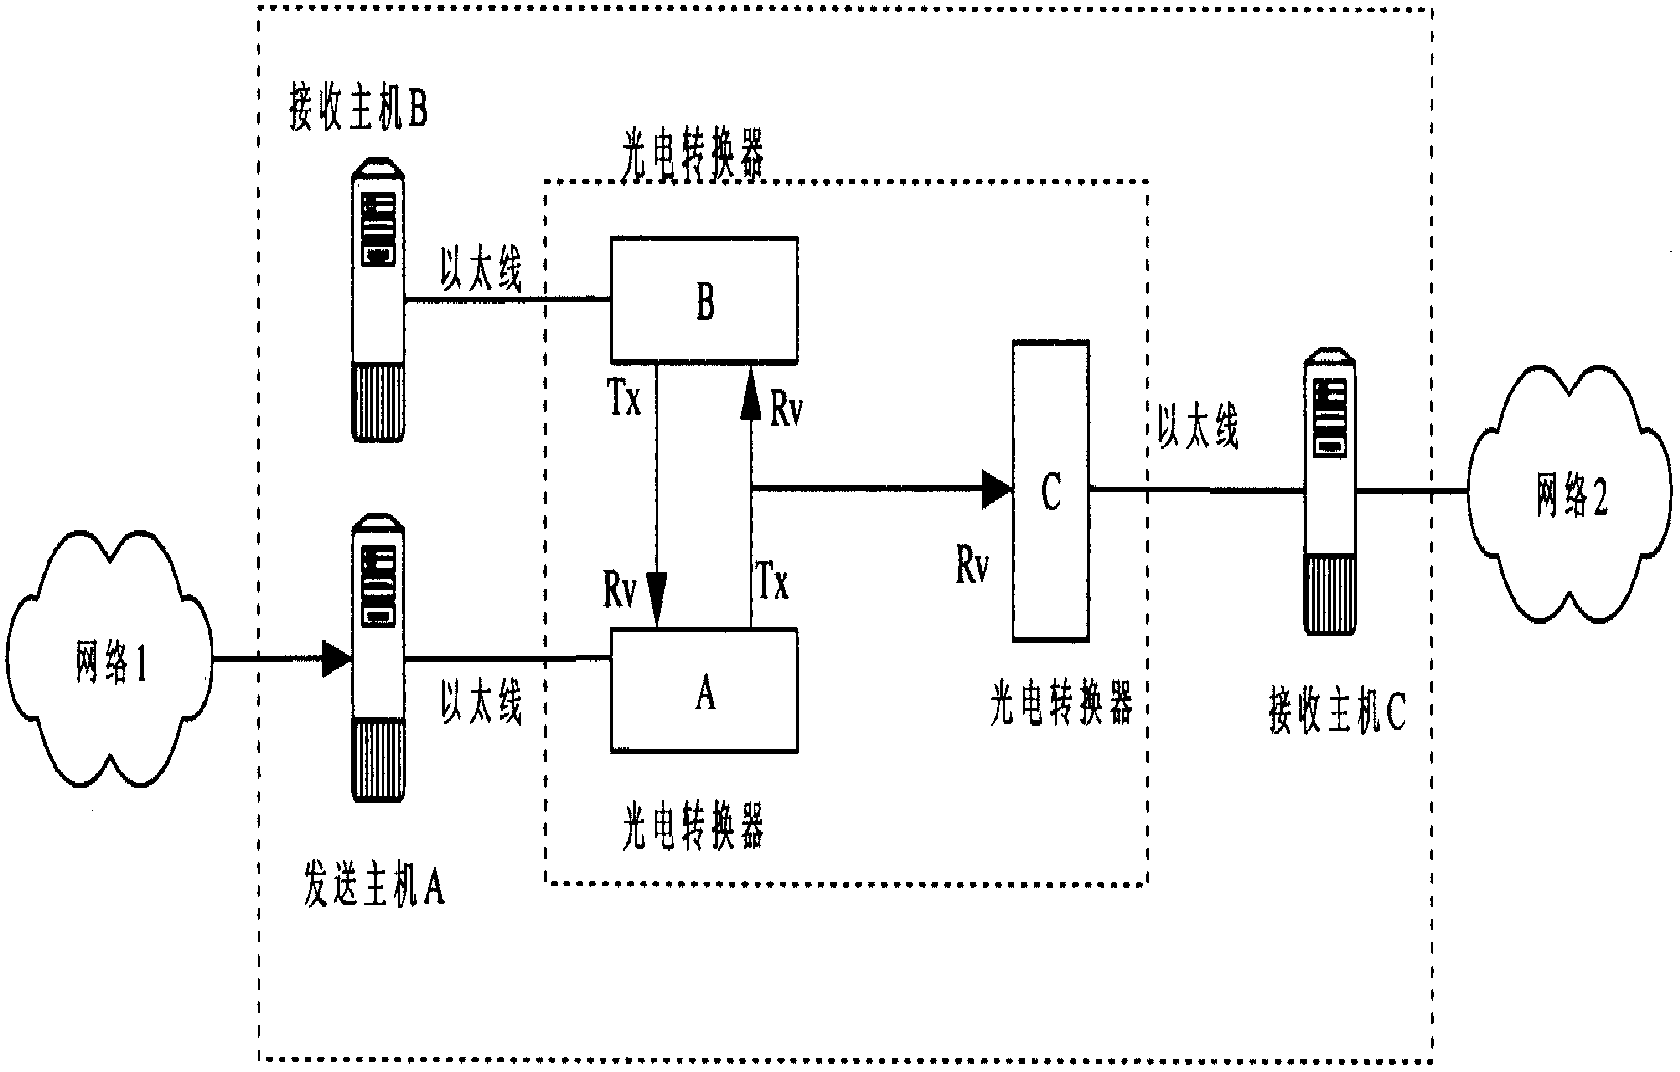 One-way data exchange device and method for physical isolation among networks at different security levels